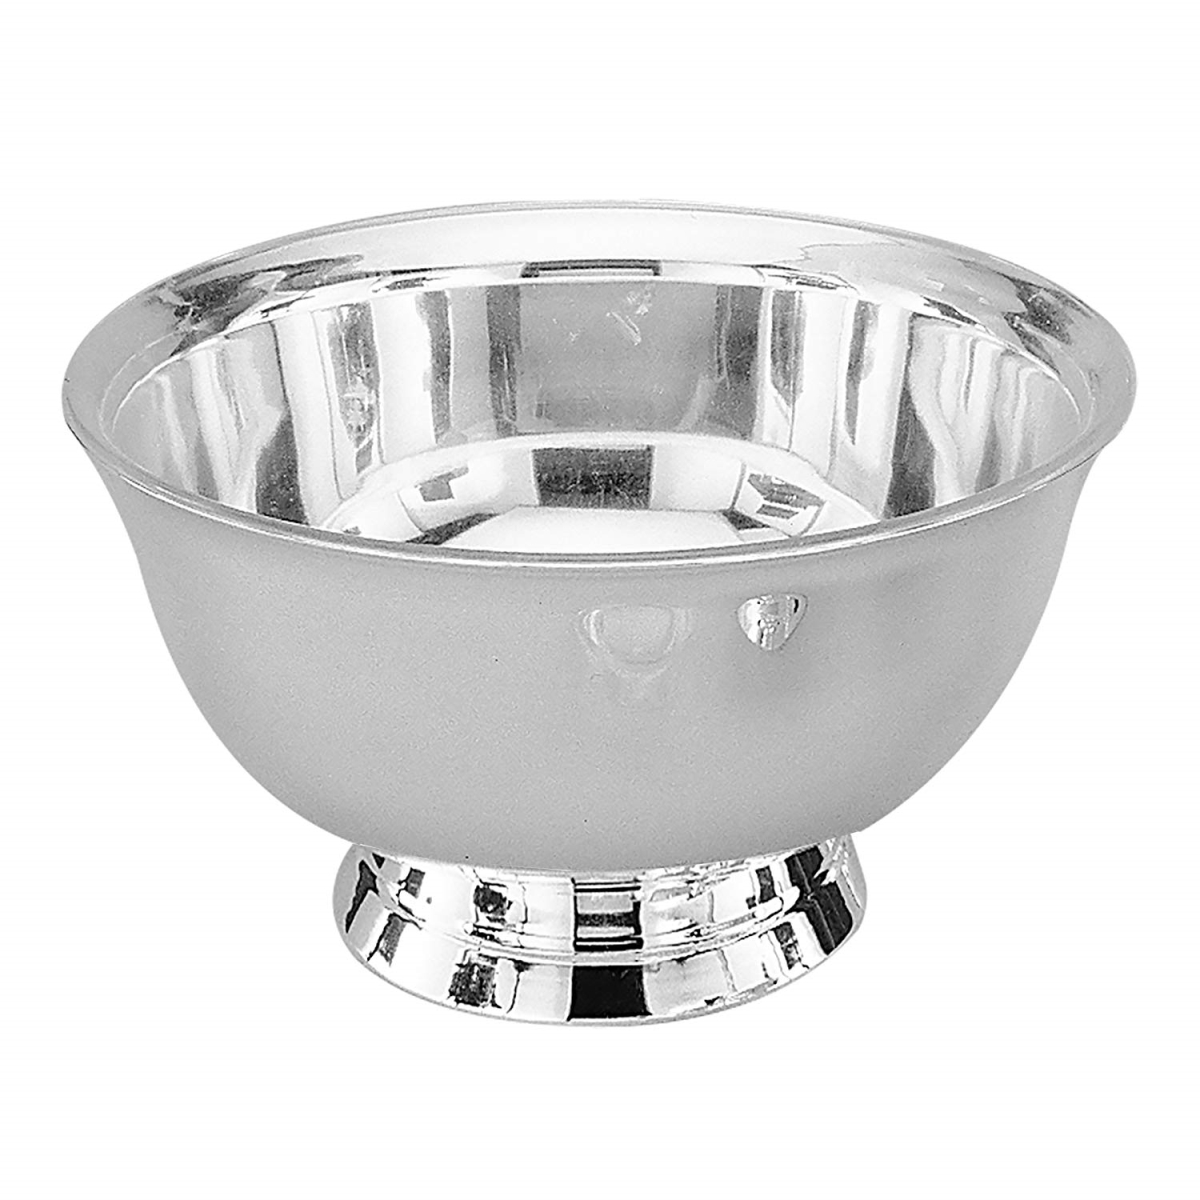 82576 6 In. Revere Bowl With Liner